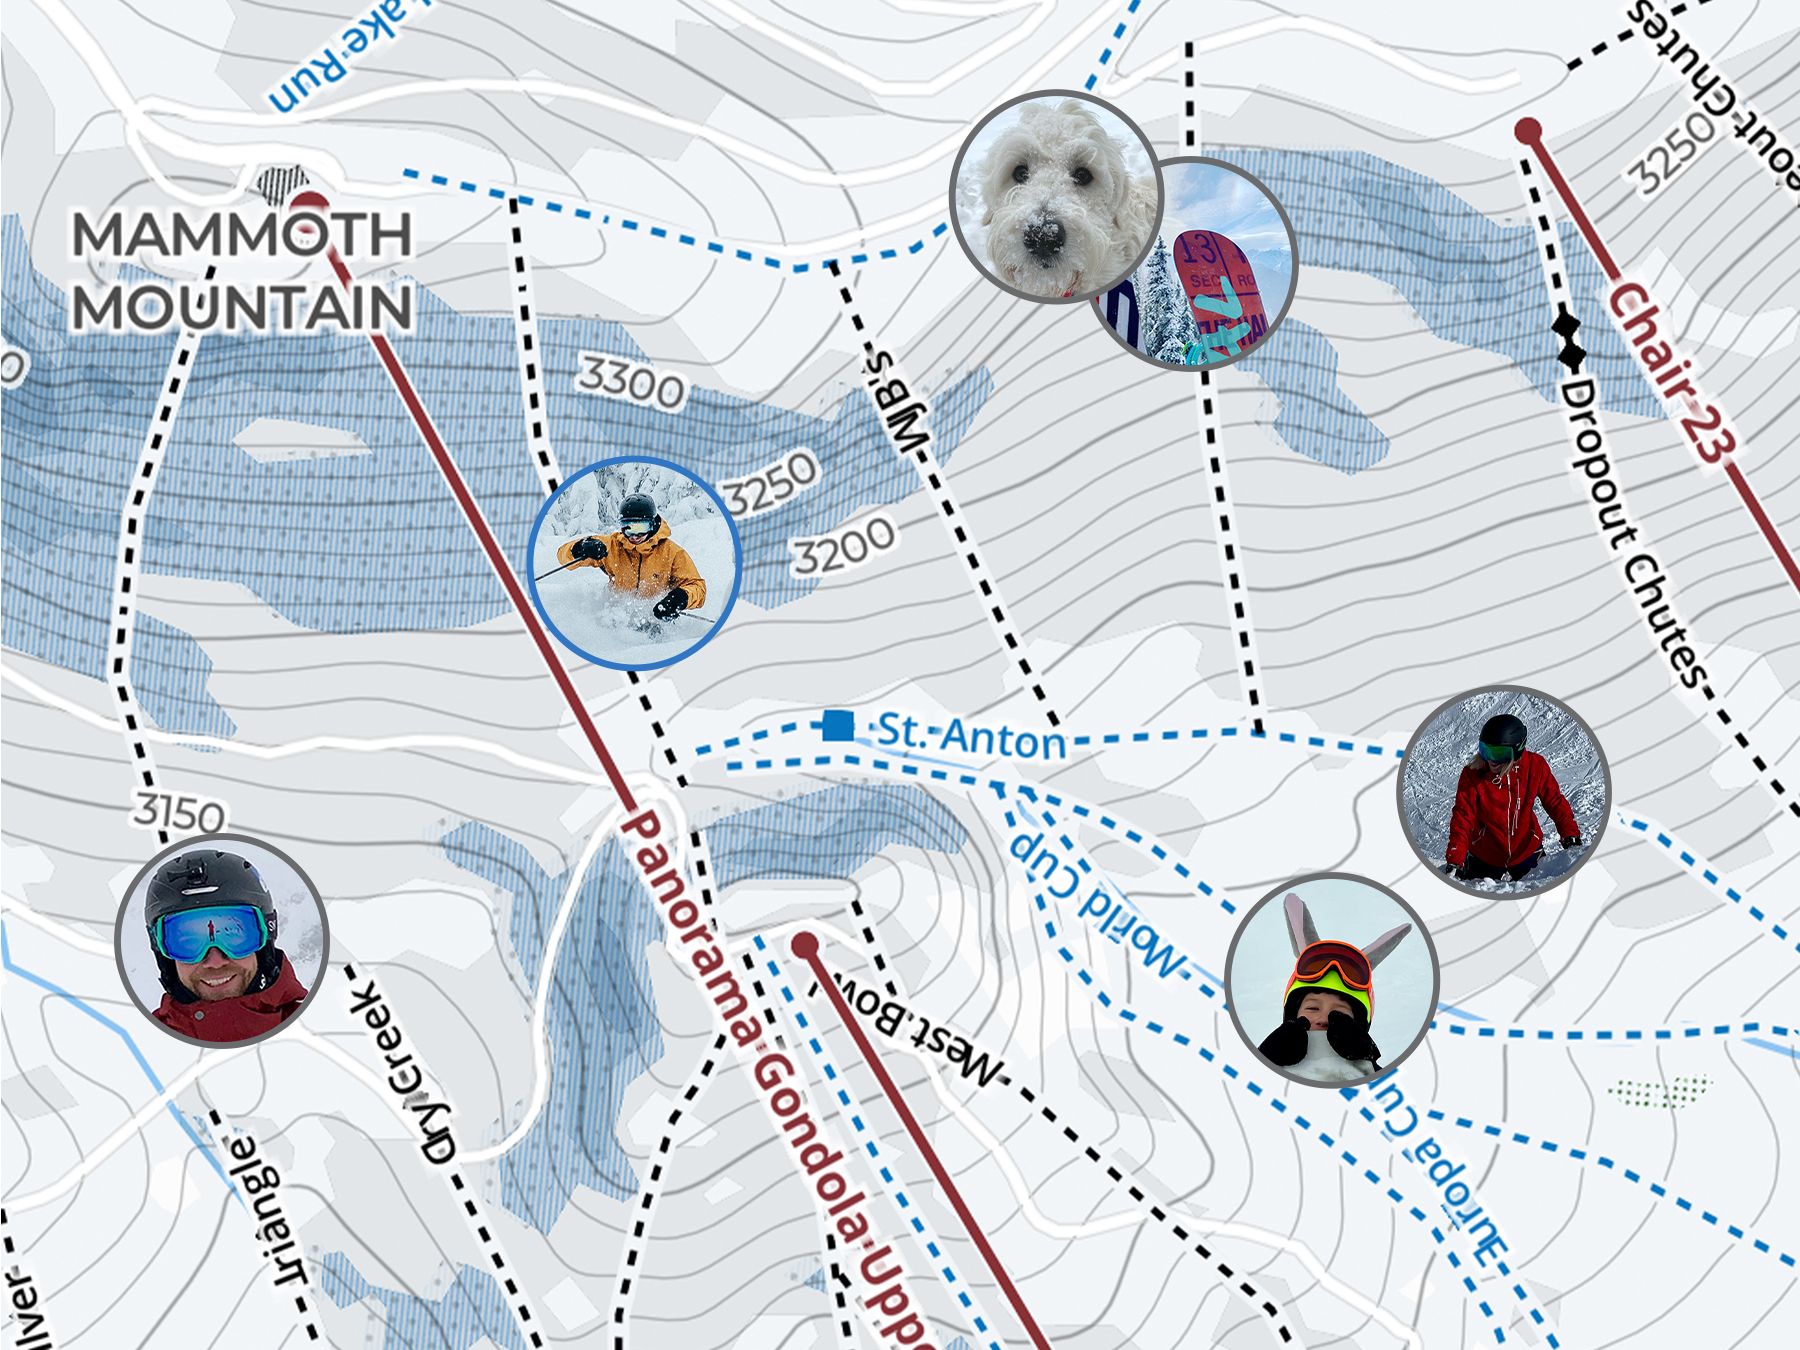 Ride on Interactive Ski Maps at over 200 Resorts Worldwide